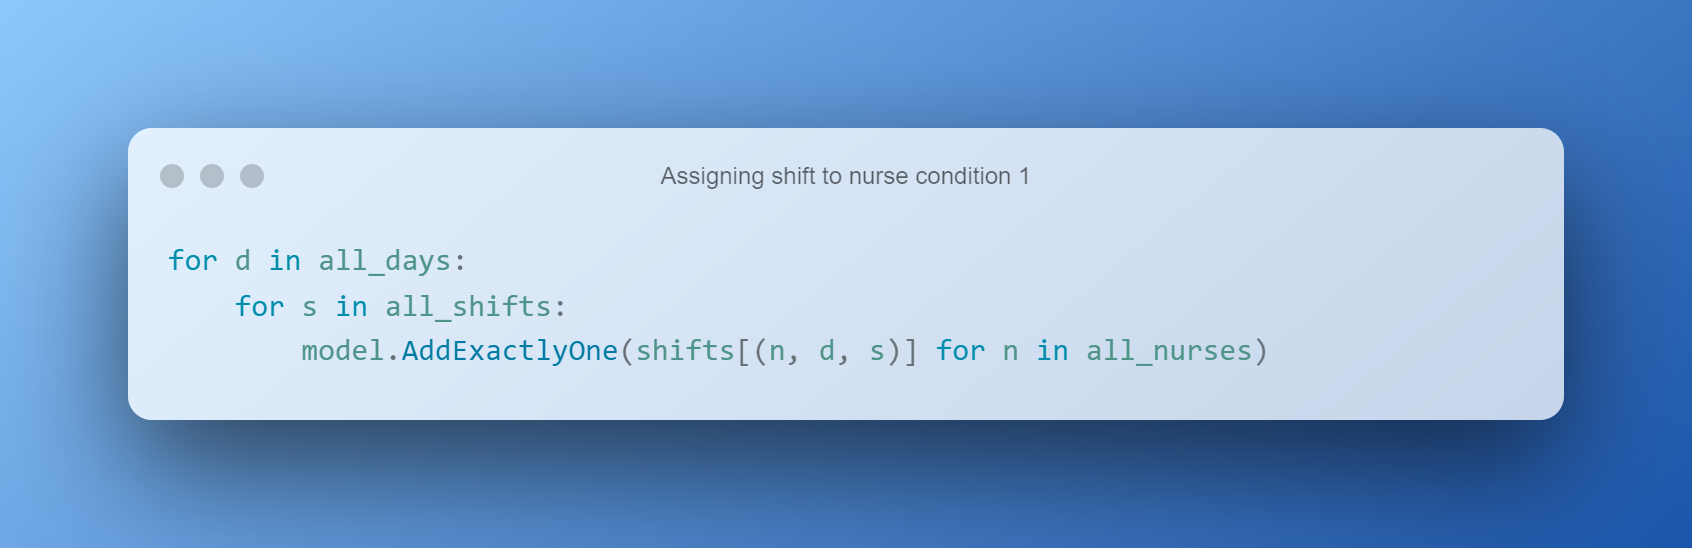 Assigning Shift To Nurse Condition 1